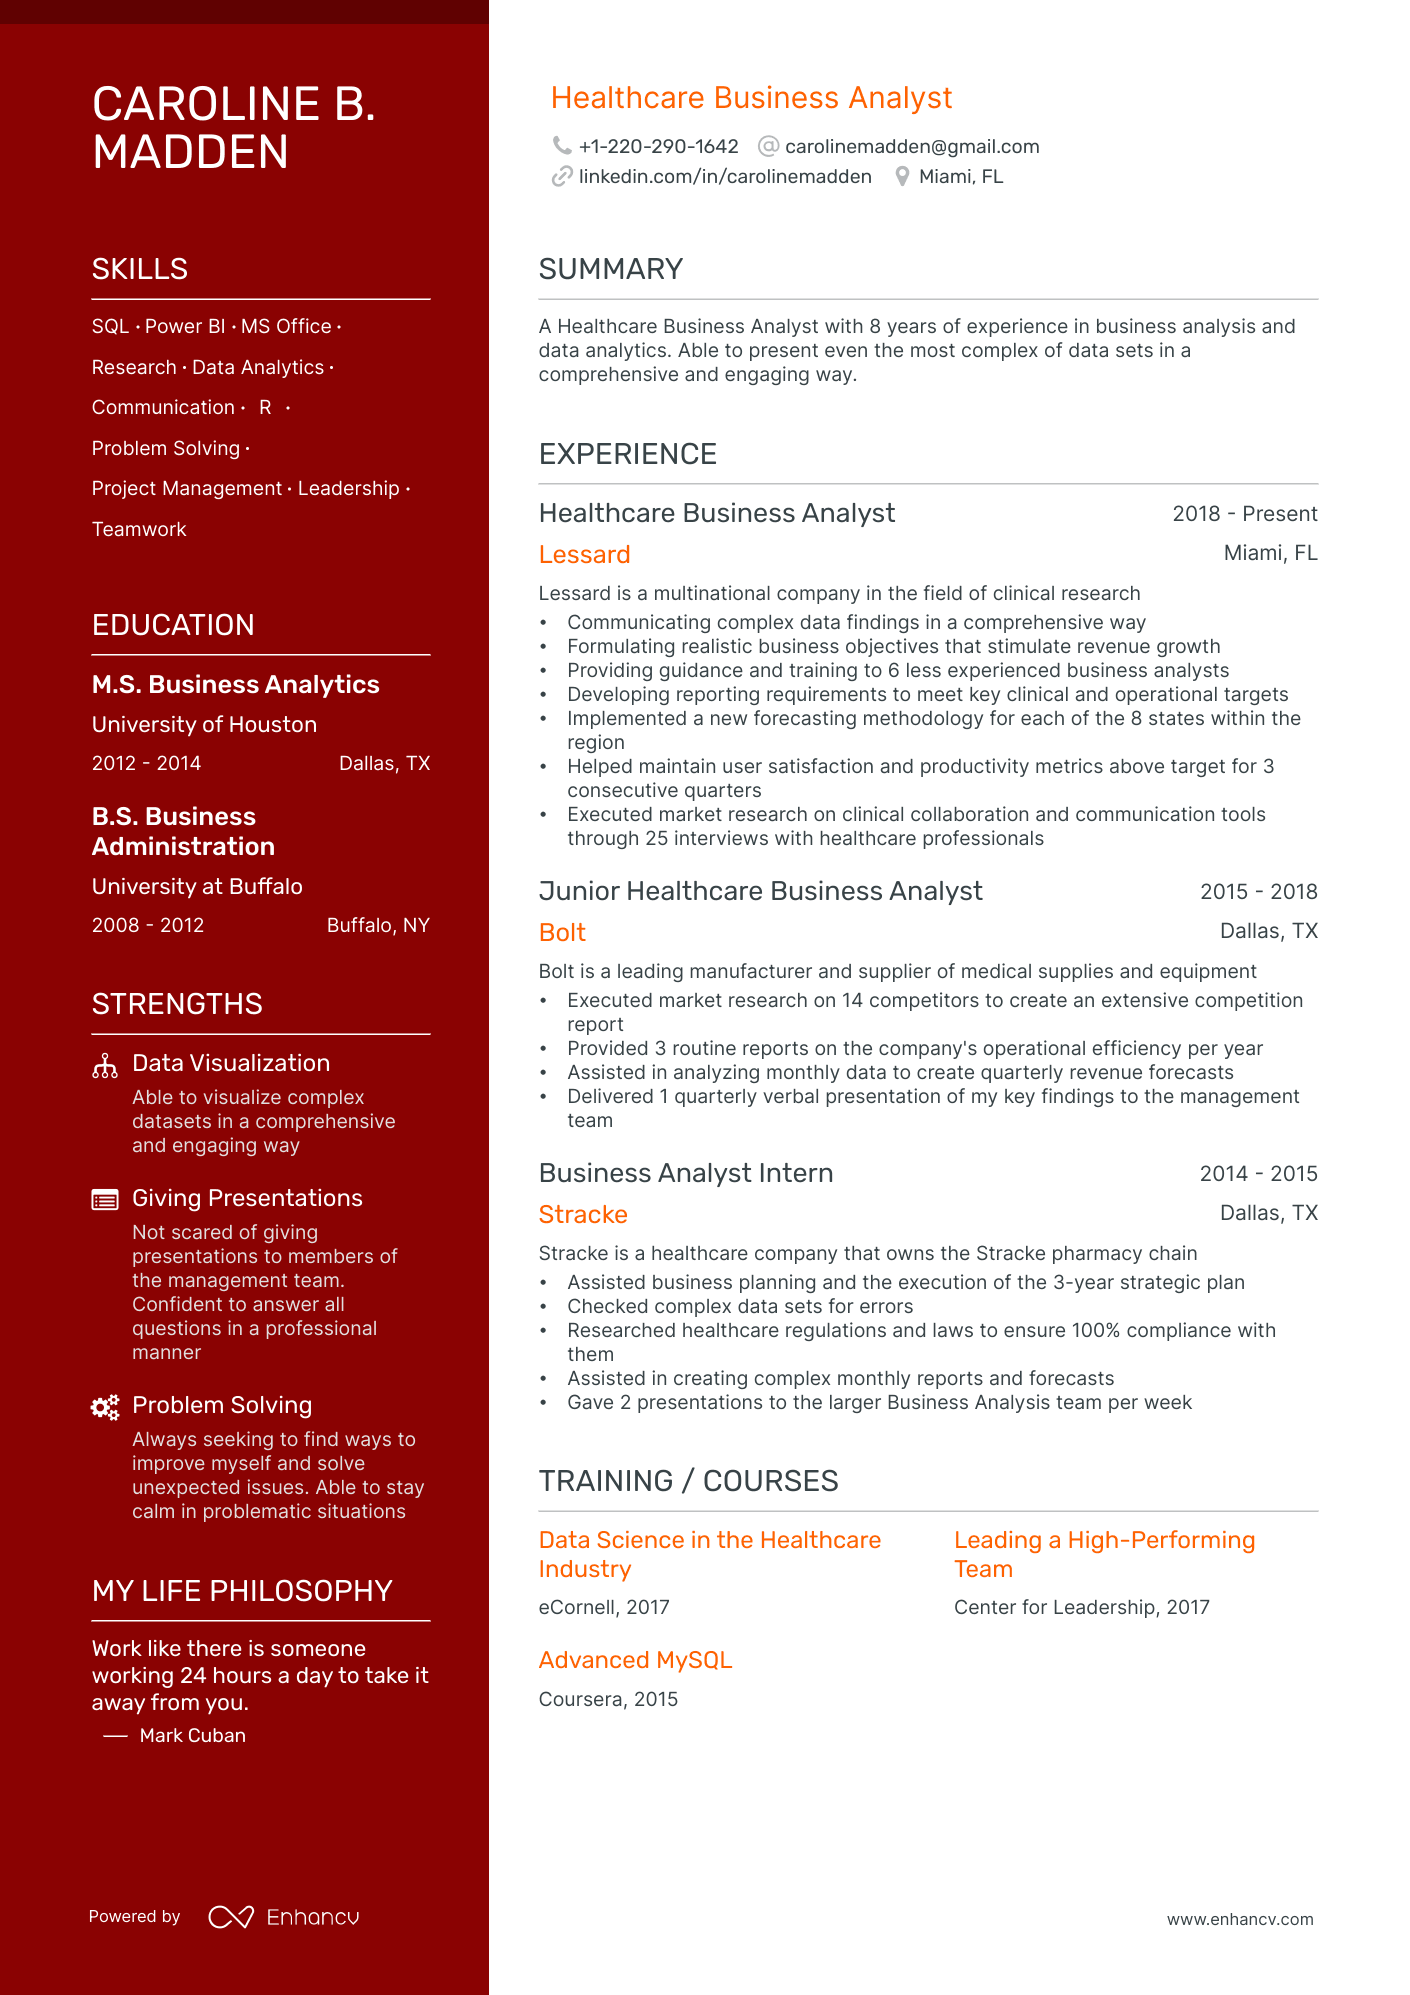 Healthcare Business Analyst resume example